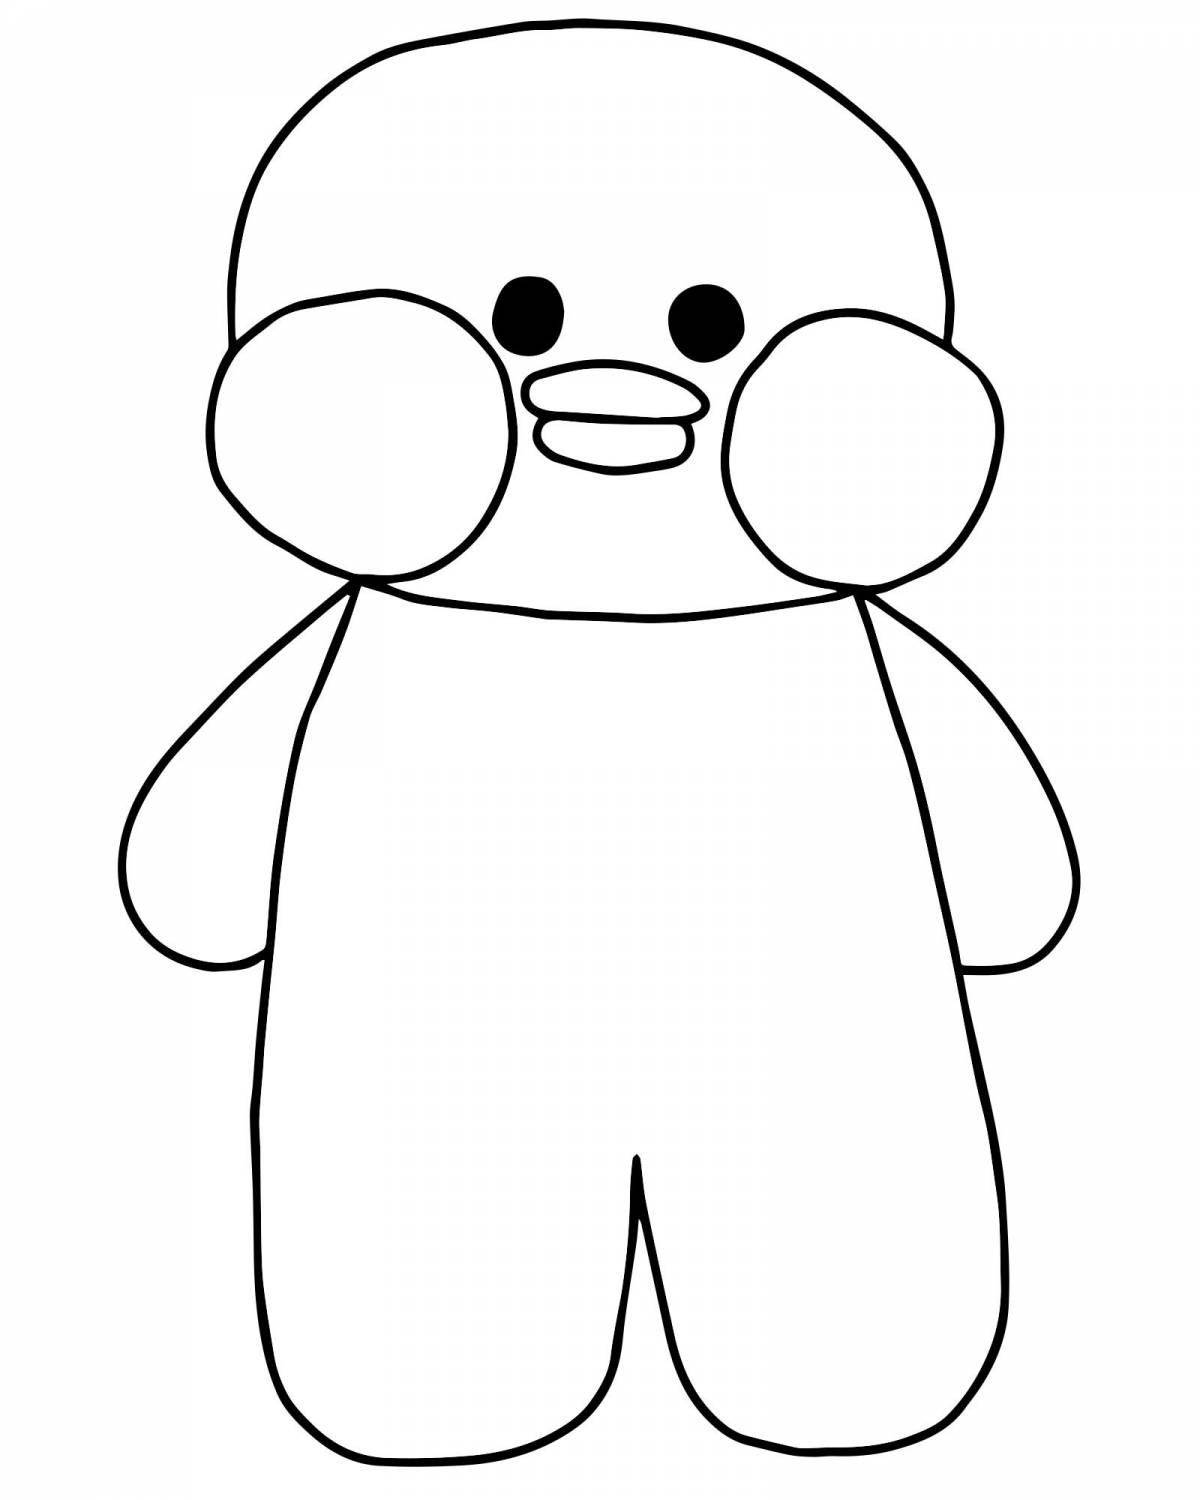 Colorful fanfan duck coloring page